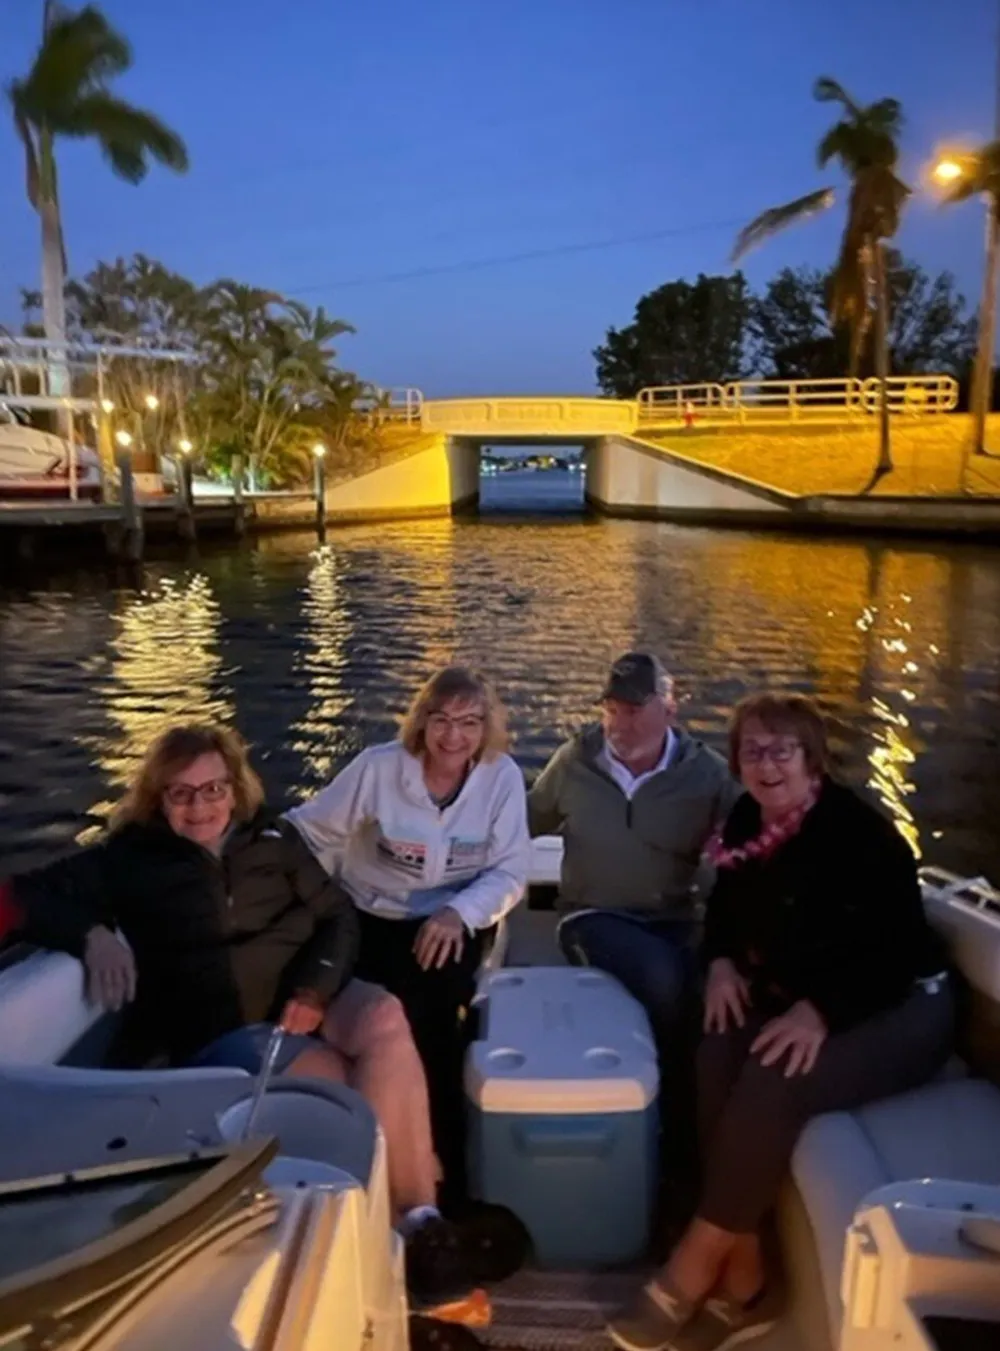 Four people are smiling for a photo while sitting on a boat in a canal with palm trees and a bridge in the background during twilight